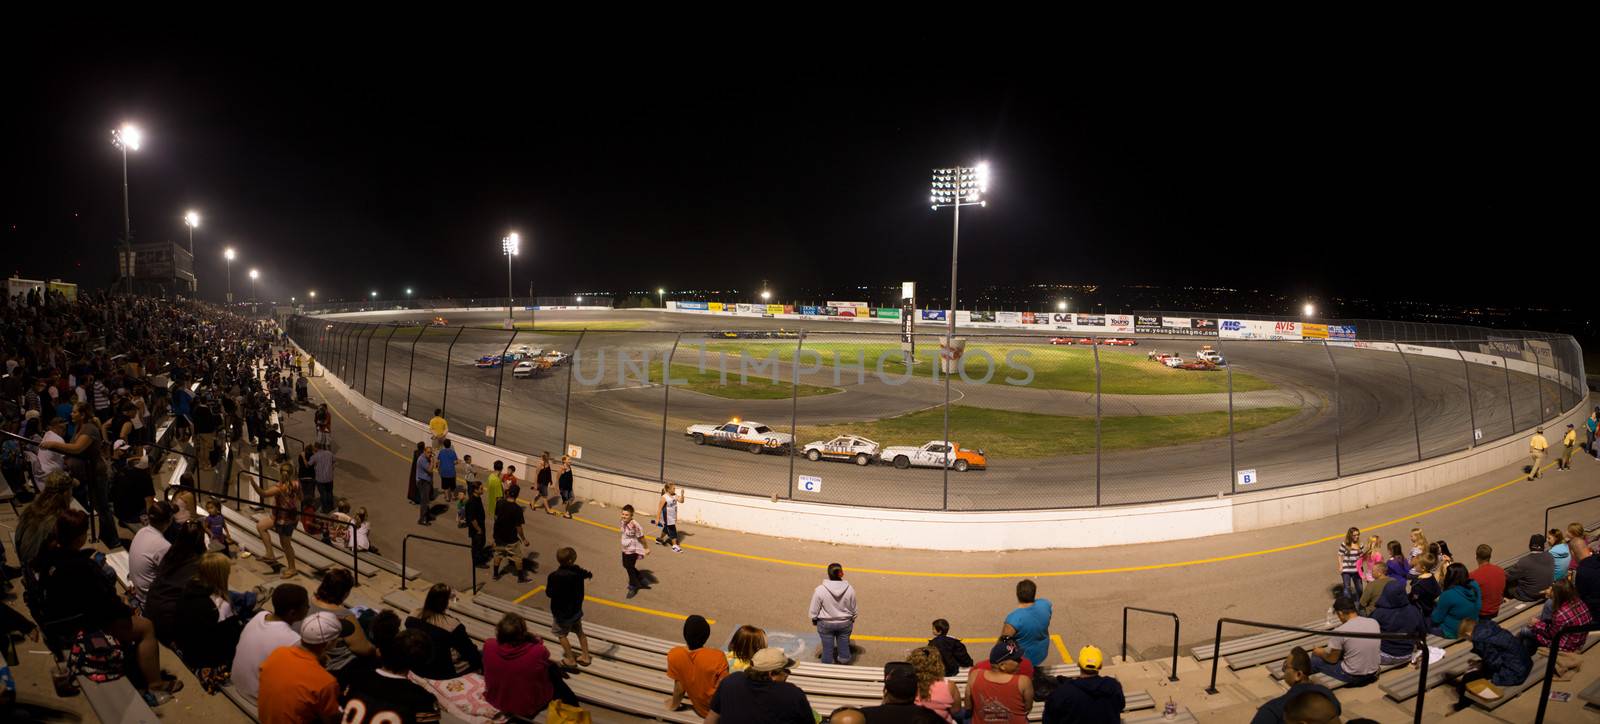 People watchting a stock car competition at night by watchtheworld